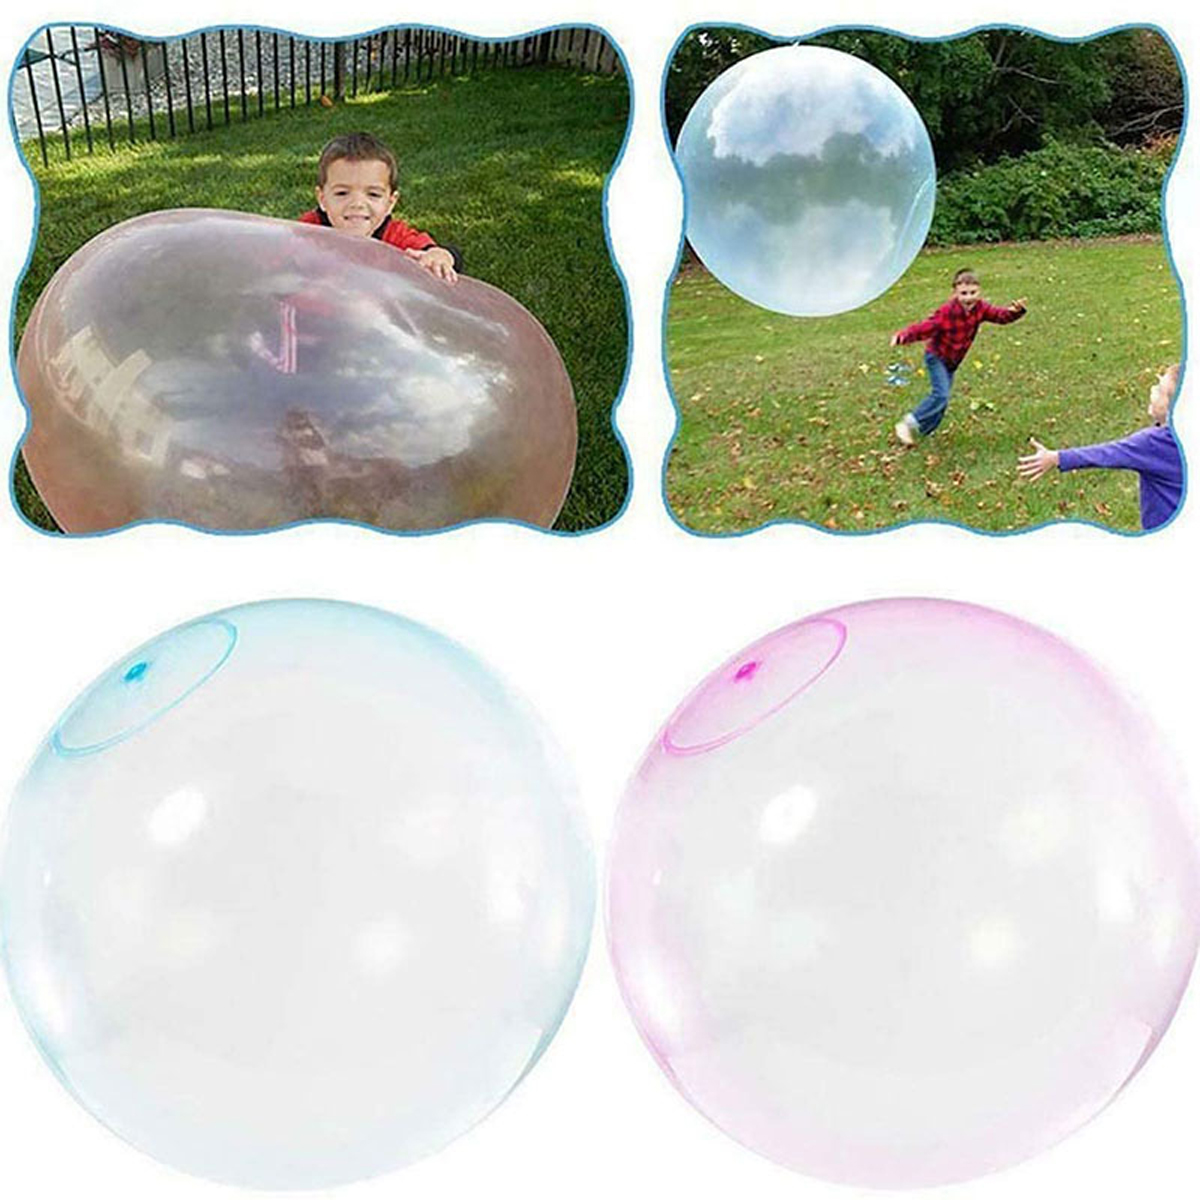 120CM-Multi-color-Bubble-Ball-Inflatable-Filling-Water-Giant-Ball-Toys-for-Kids-Play-Gift-1891654-3